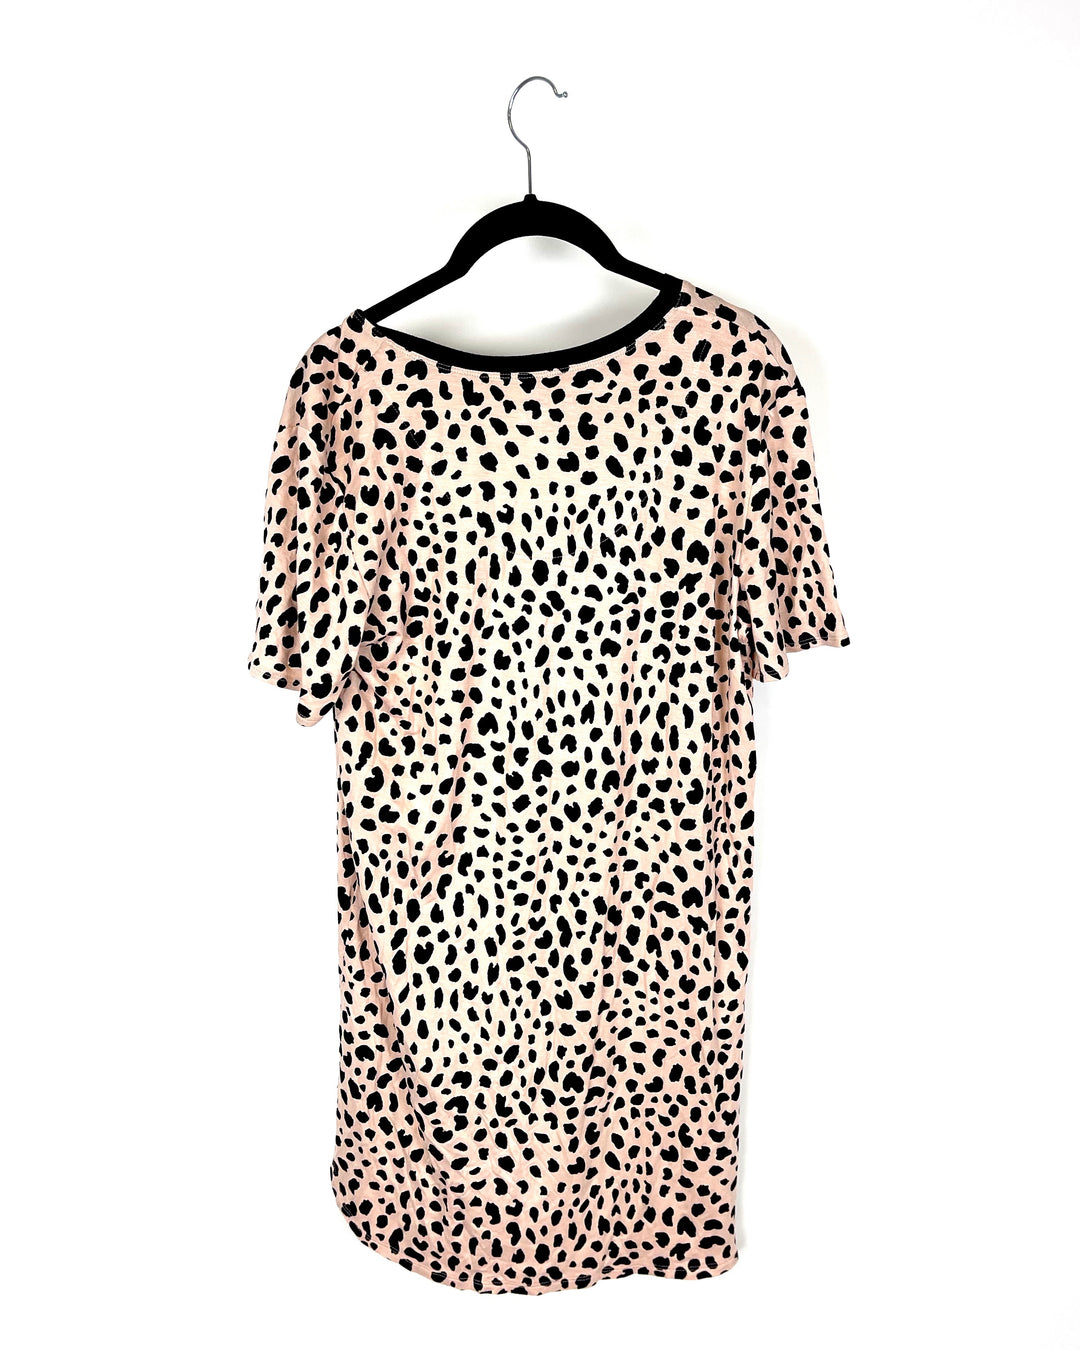 Animal Print Night Gown - Extra Small